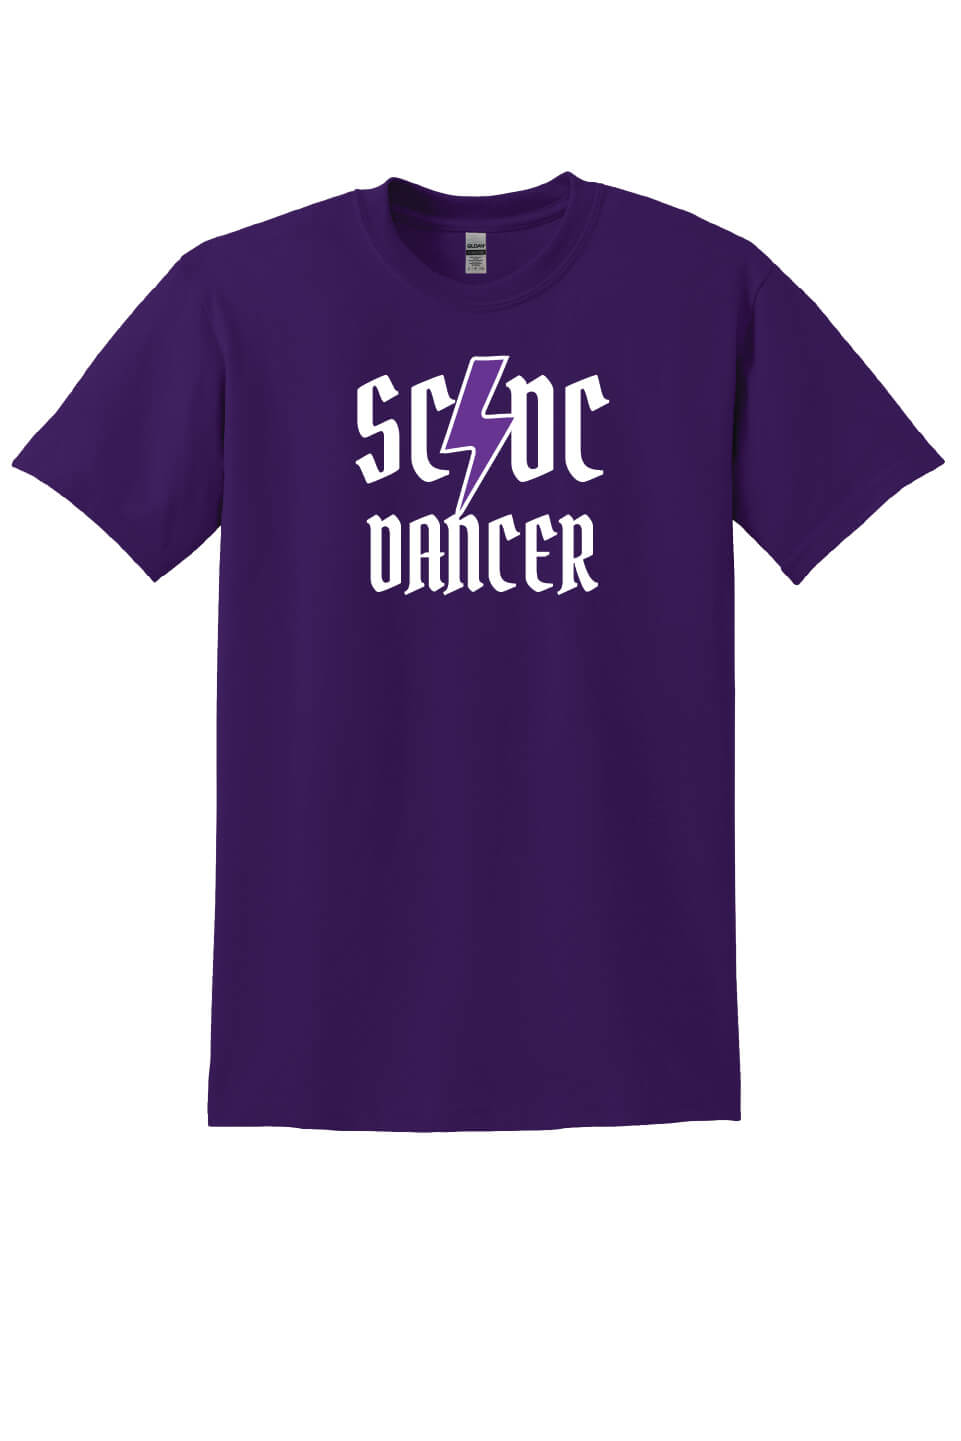 SCDC Short Sleeve T-Shirt (Youth) purple